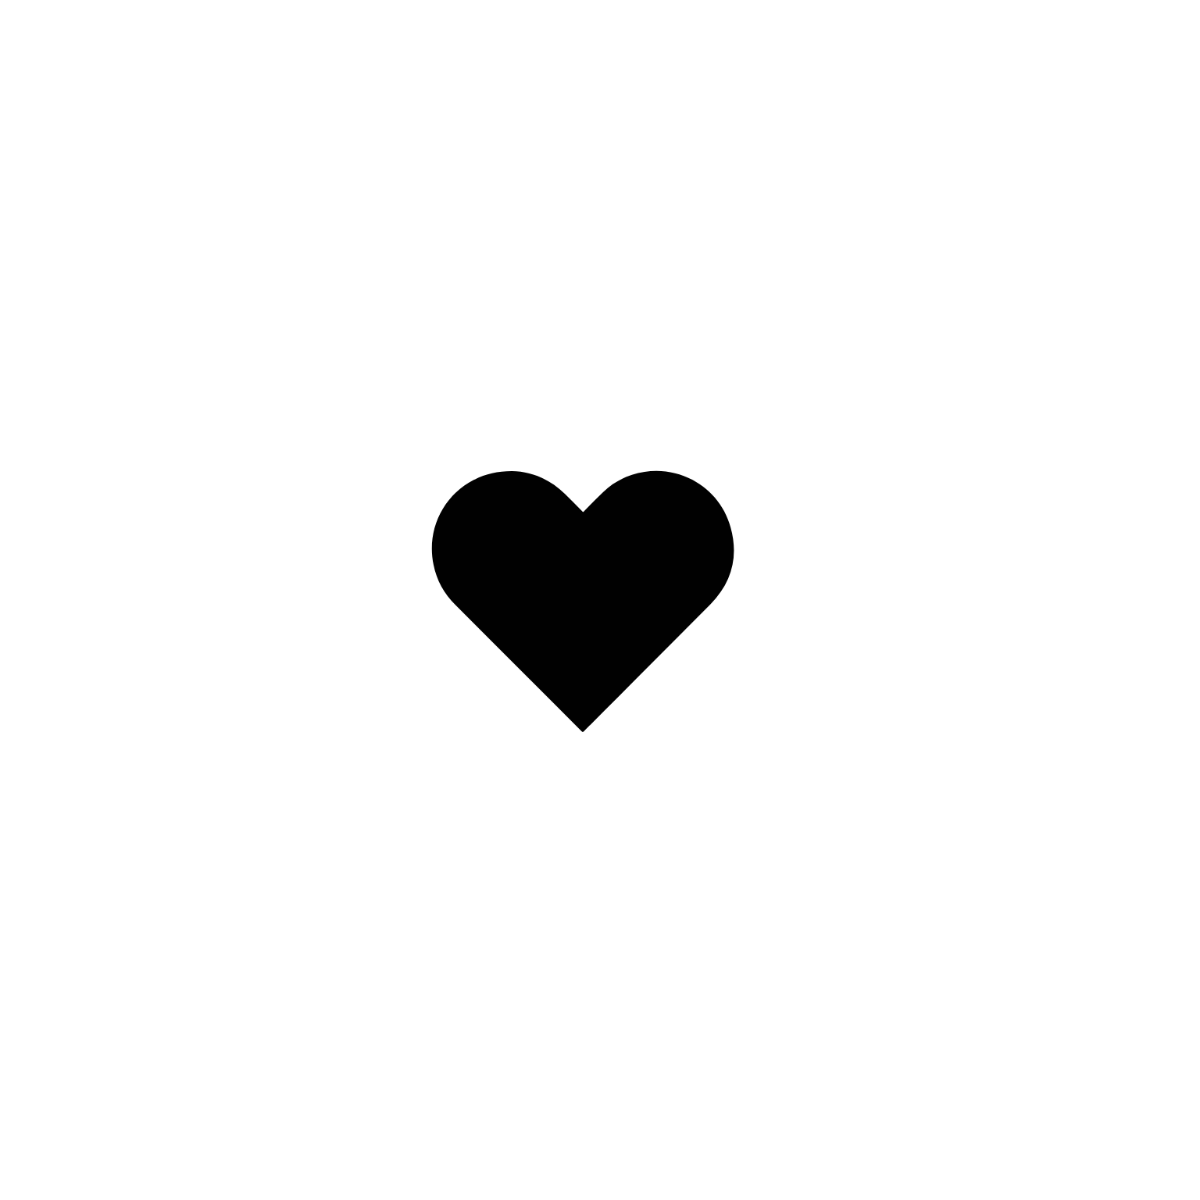 Small Black Heart Clipart Template